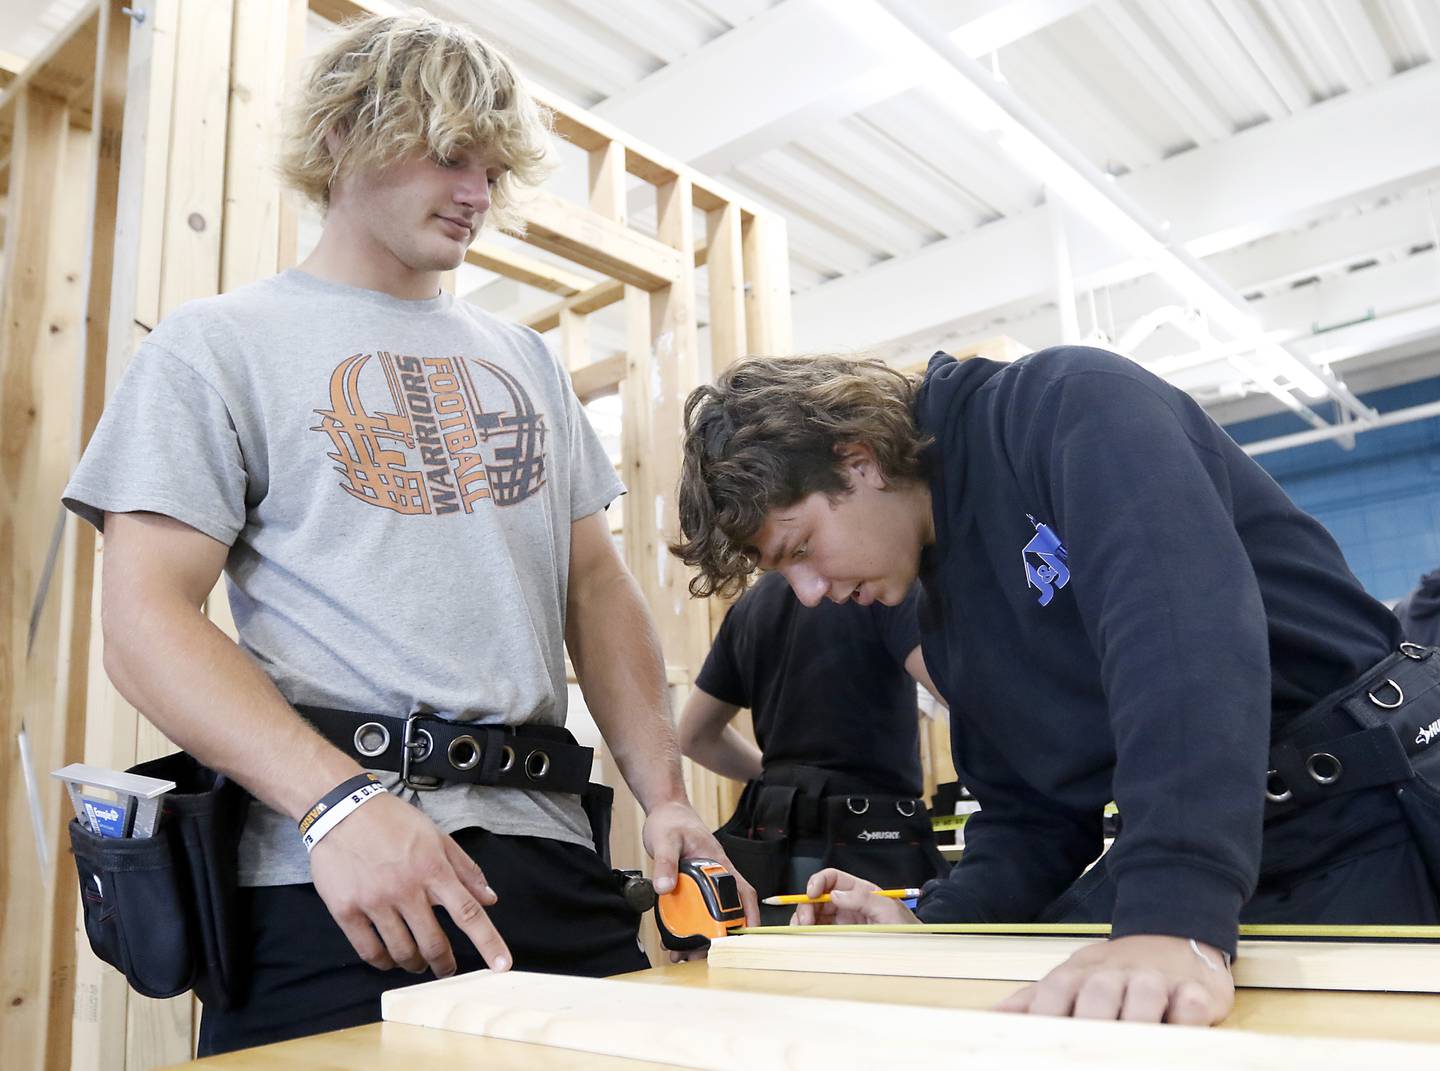 McHenry High School seniors Frank Smiesko, left, and Carlo Alfaro, right, measure a plank to build a stud wall Tuesday, Aug. 30, 2022, during a building trades class at the school McHenry secondary.  Students in the class will build the tiny stores that will house the incubator retail businesses on McHenry's Riverwalk in Miller Point.